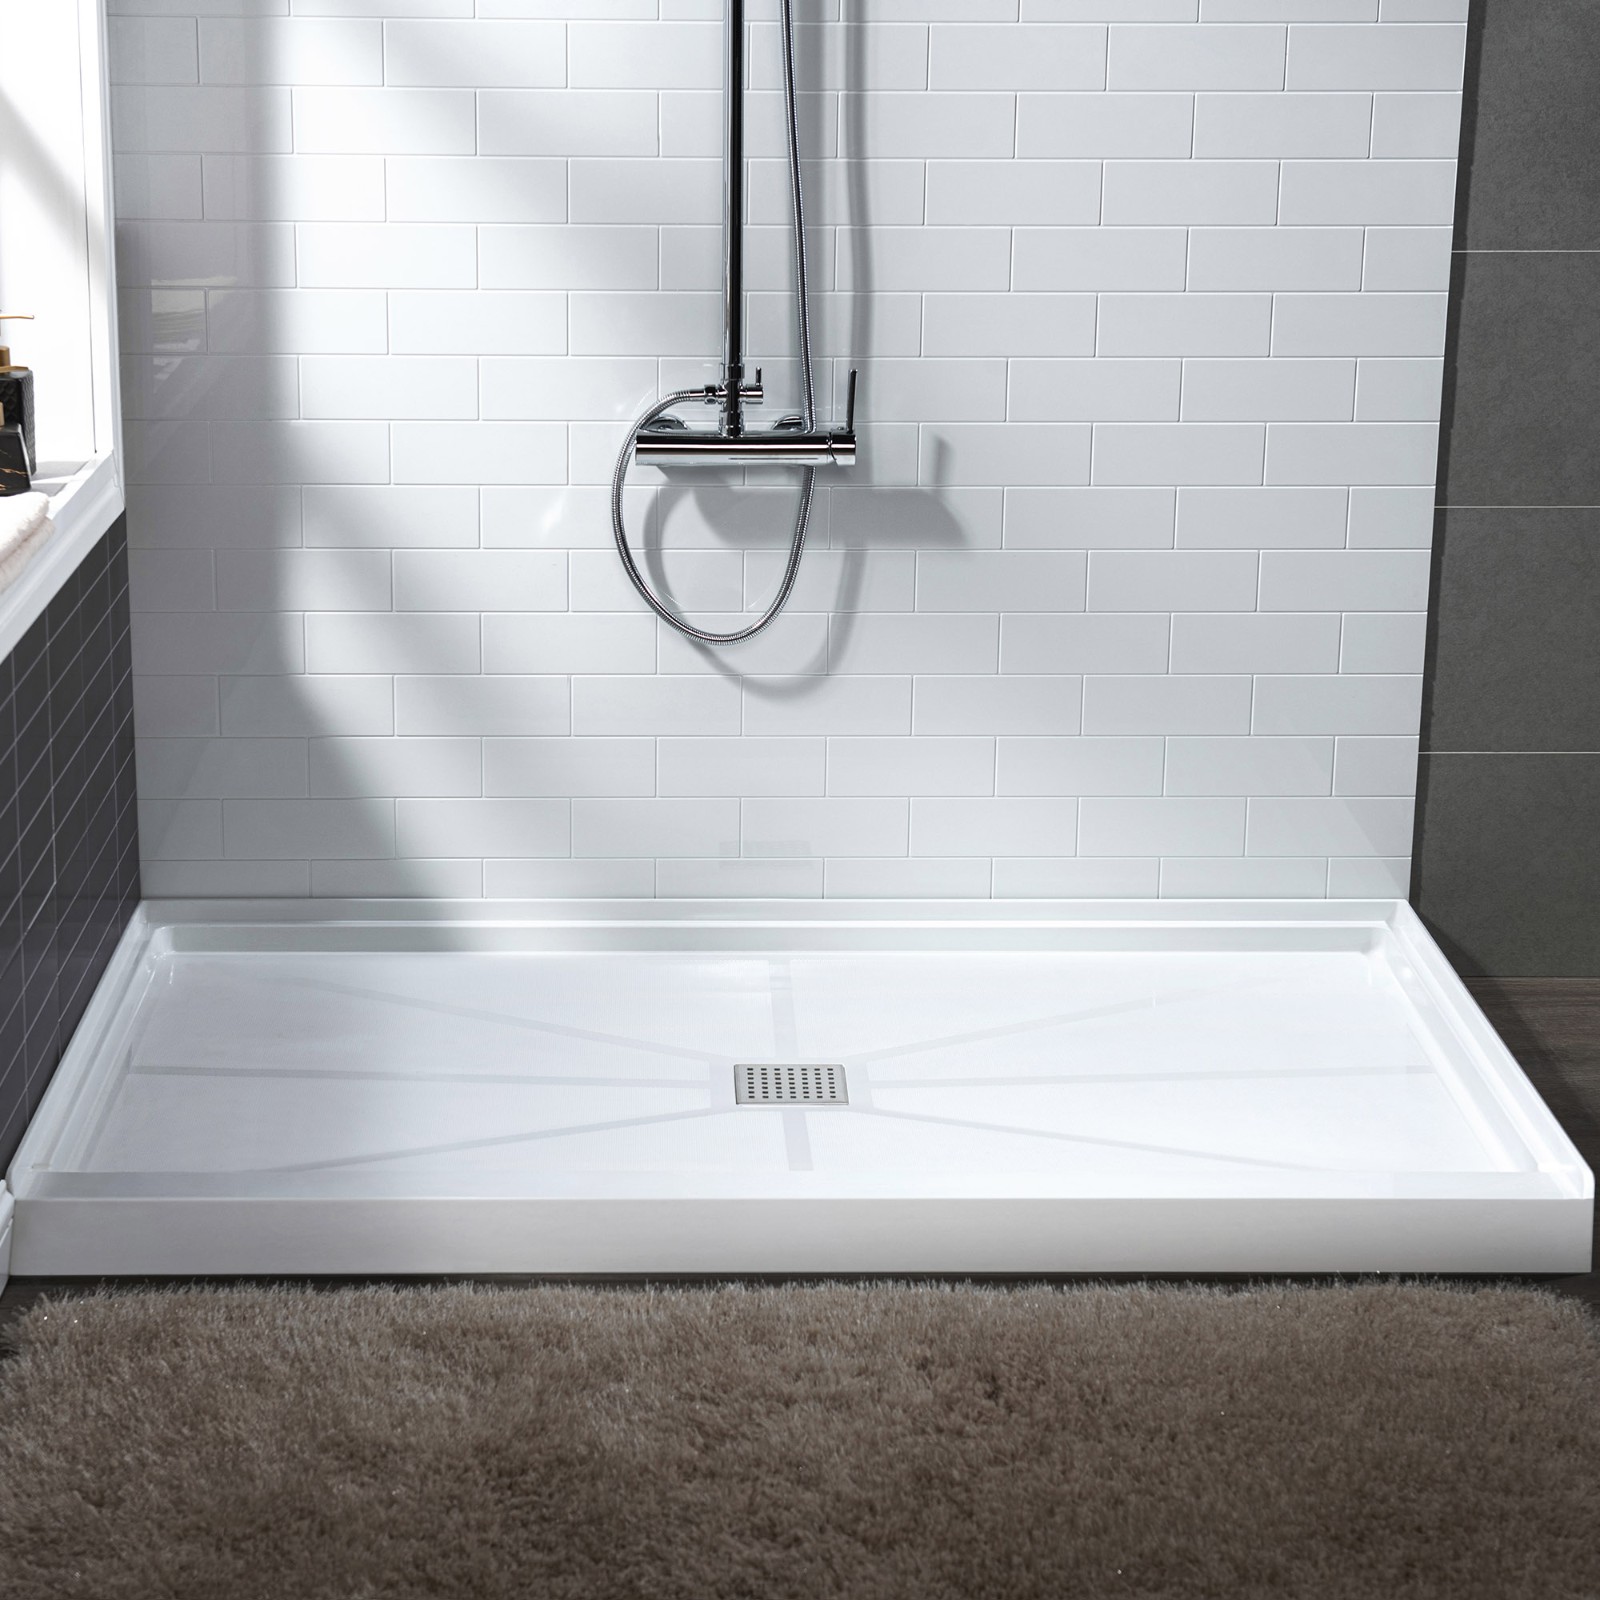  WOODBRIDGE SBR4836-1000C Solid Surface Shower Base with Recessed Trench Side Including Stainless Steel Linear Cover, 48